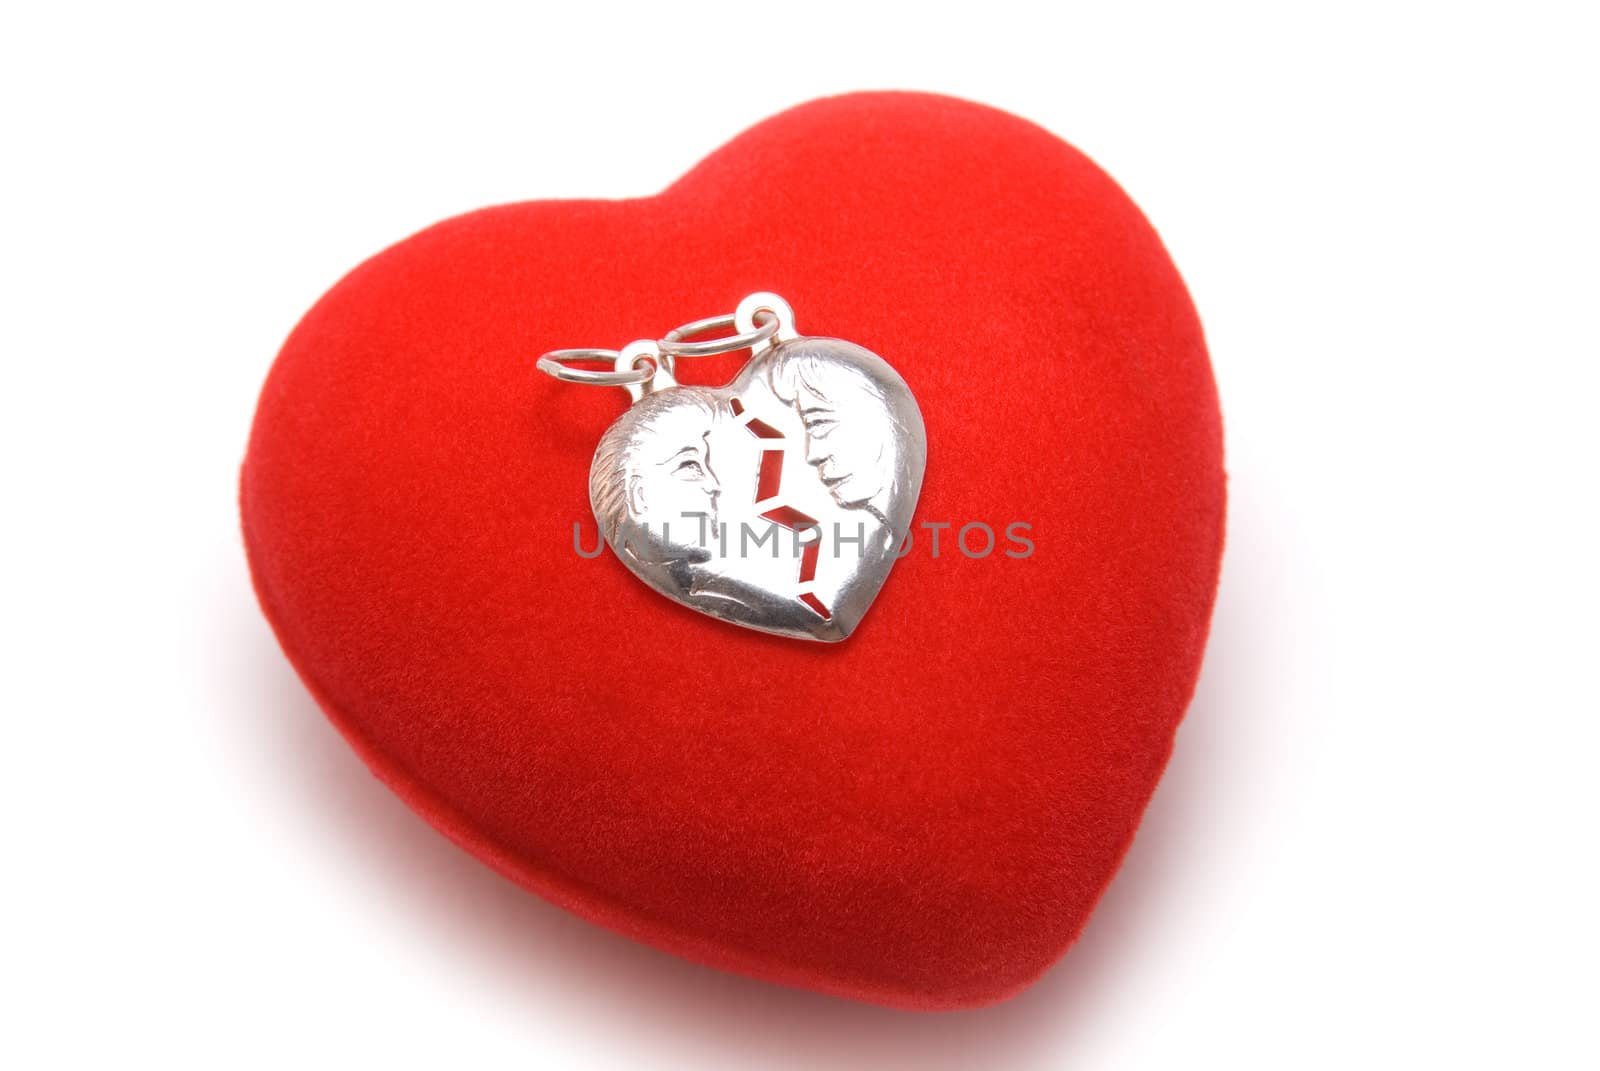 The silver medallion with profiles of the man and the woman lays on red velvet heart